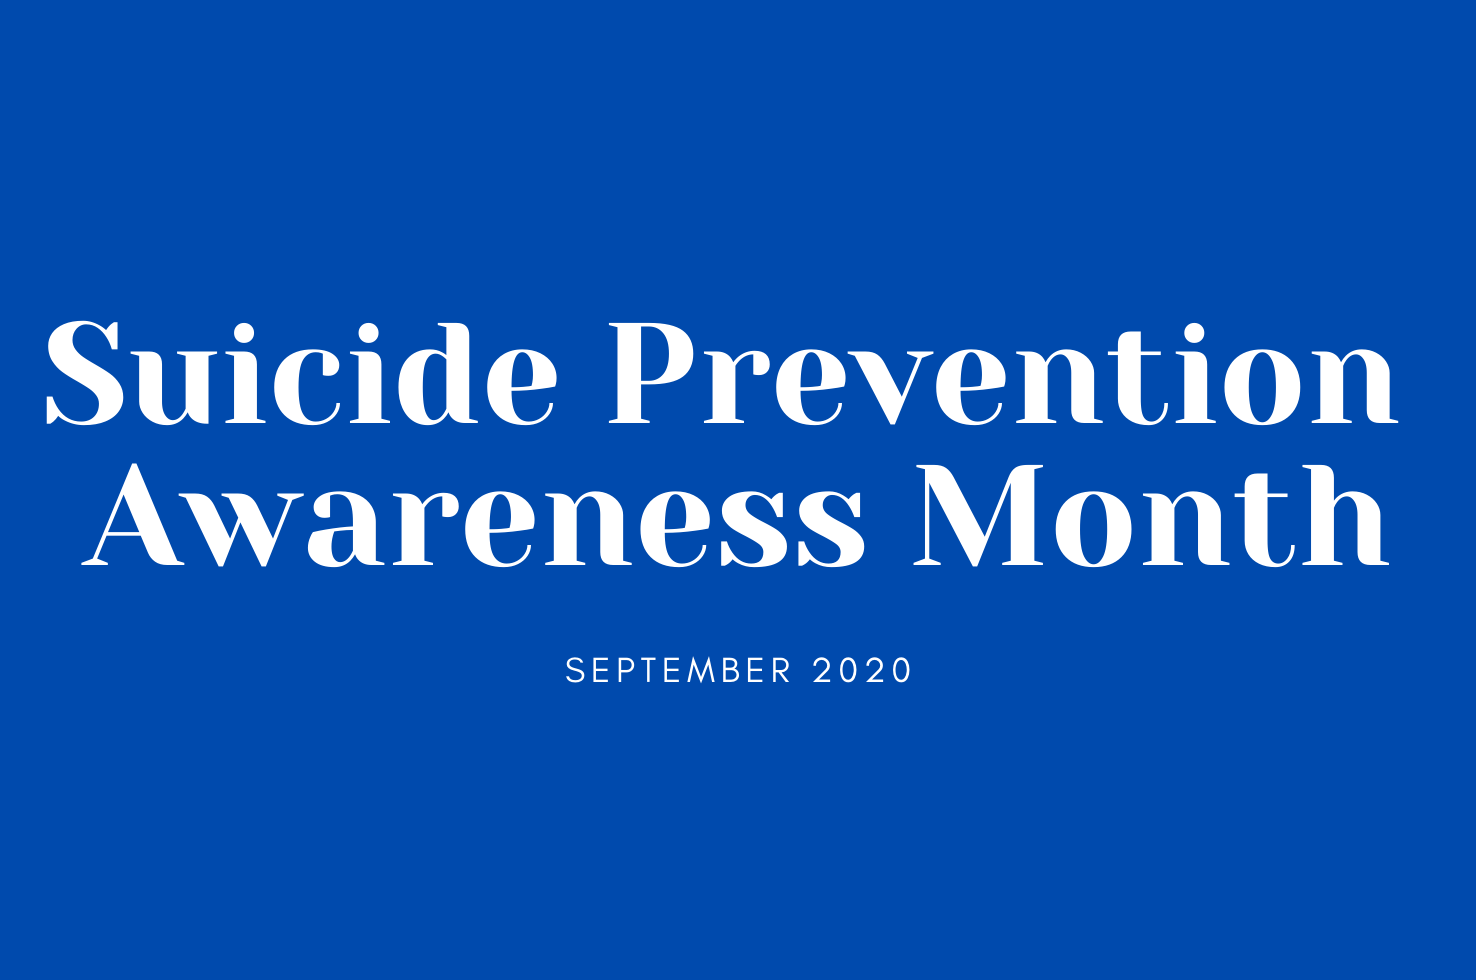 Suicide Prevention and Awareness Month